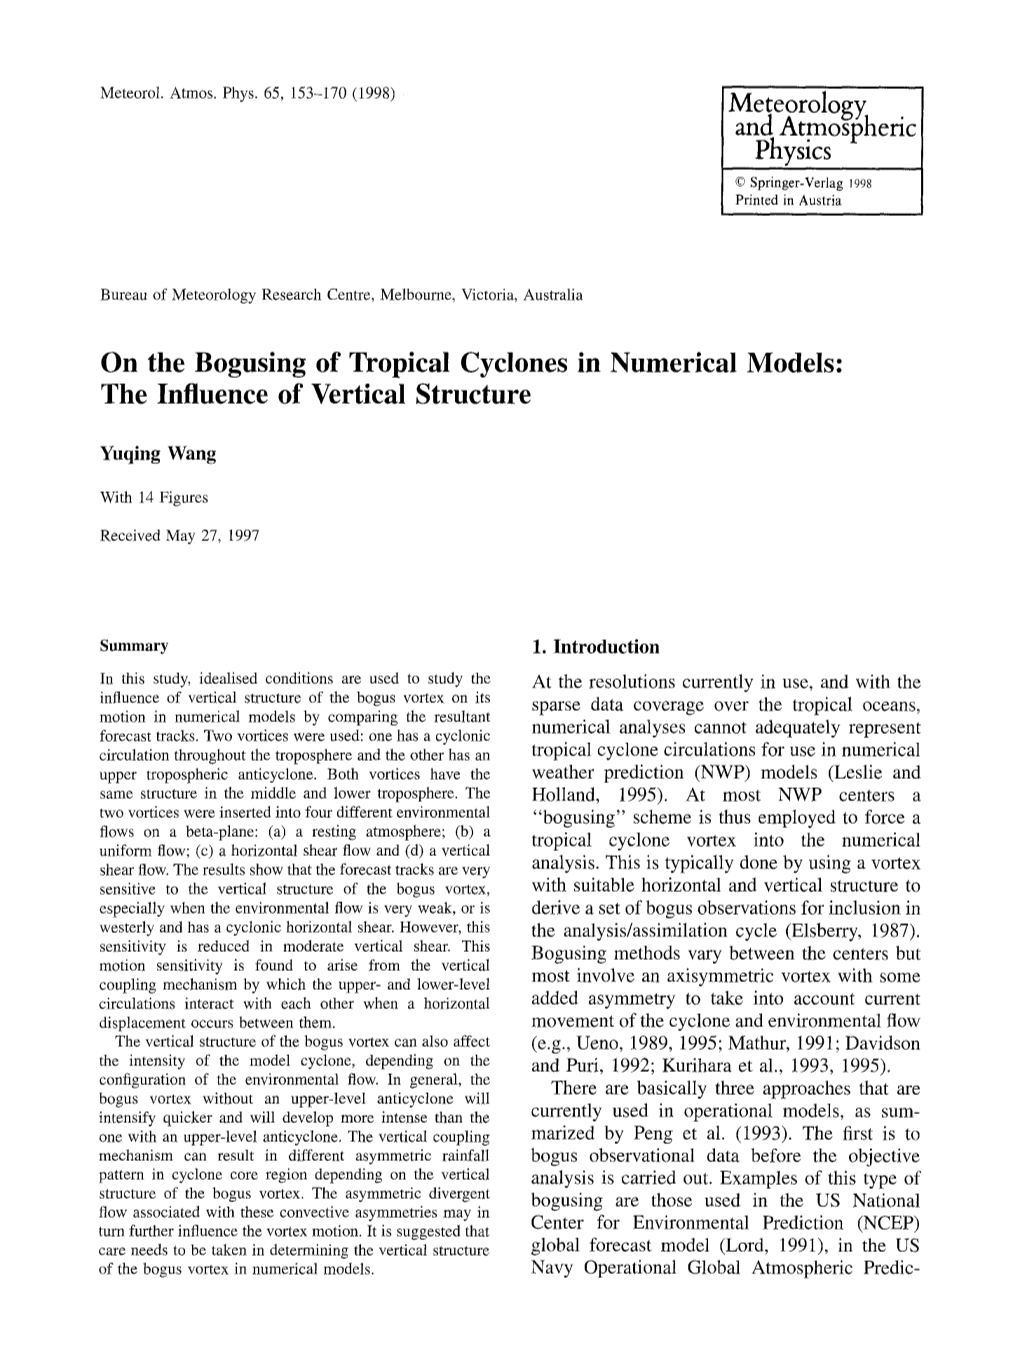 On the Bogusing of Tropical Cyclones in Numerical Models: the Influence of Vertical Structure